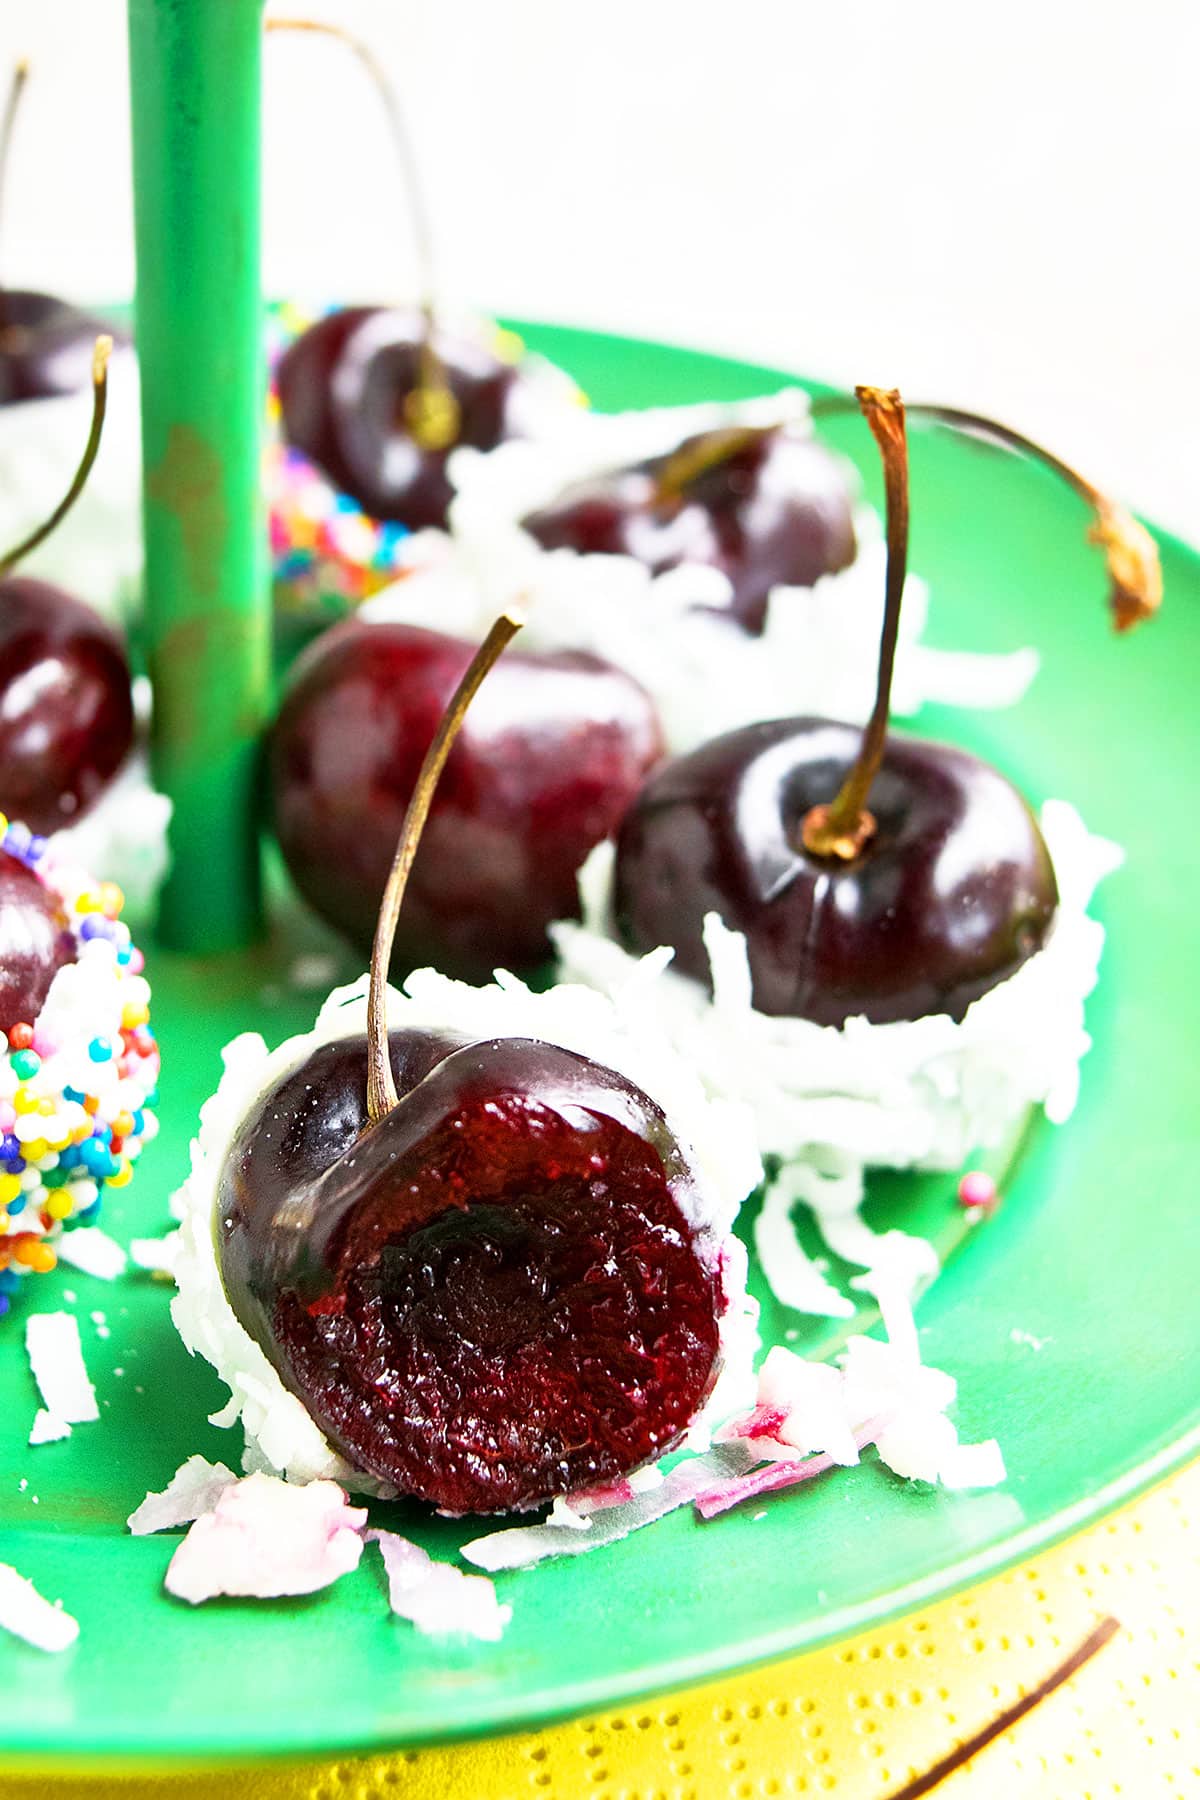 Partially Eaten Cherry With White Chocolate and Coconut on Green Dish